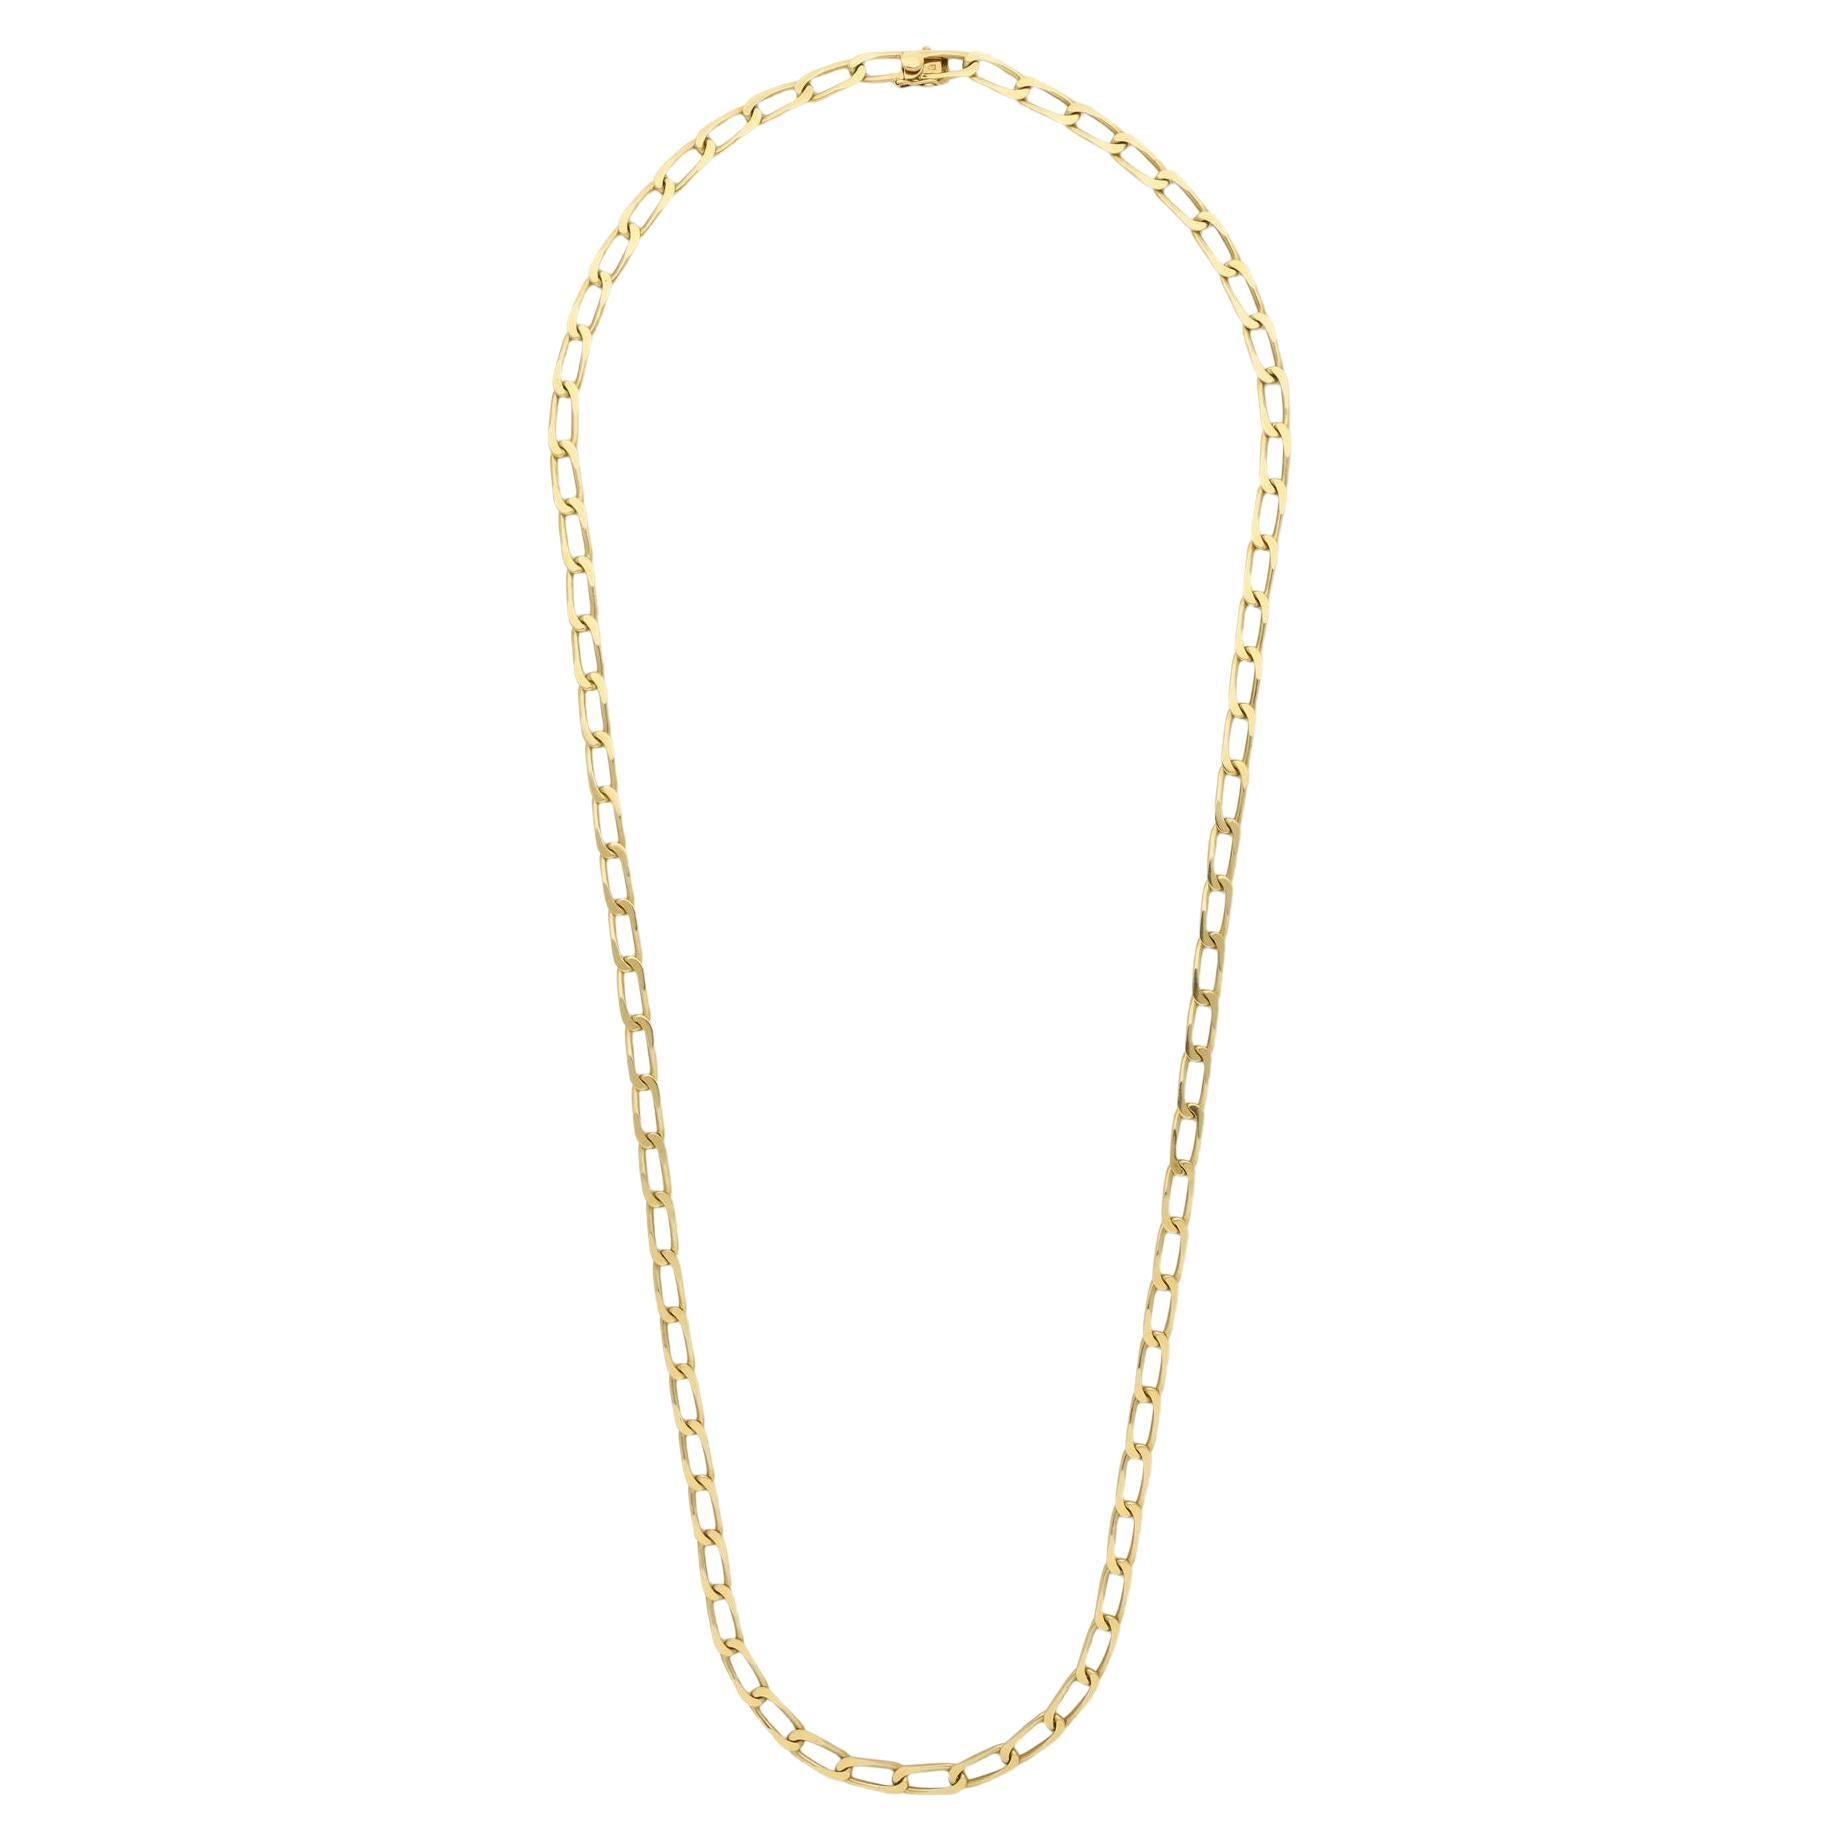 Cartier 18ct Gold 'Paperclip' Long Chain Necklace 1977